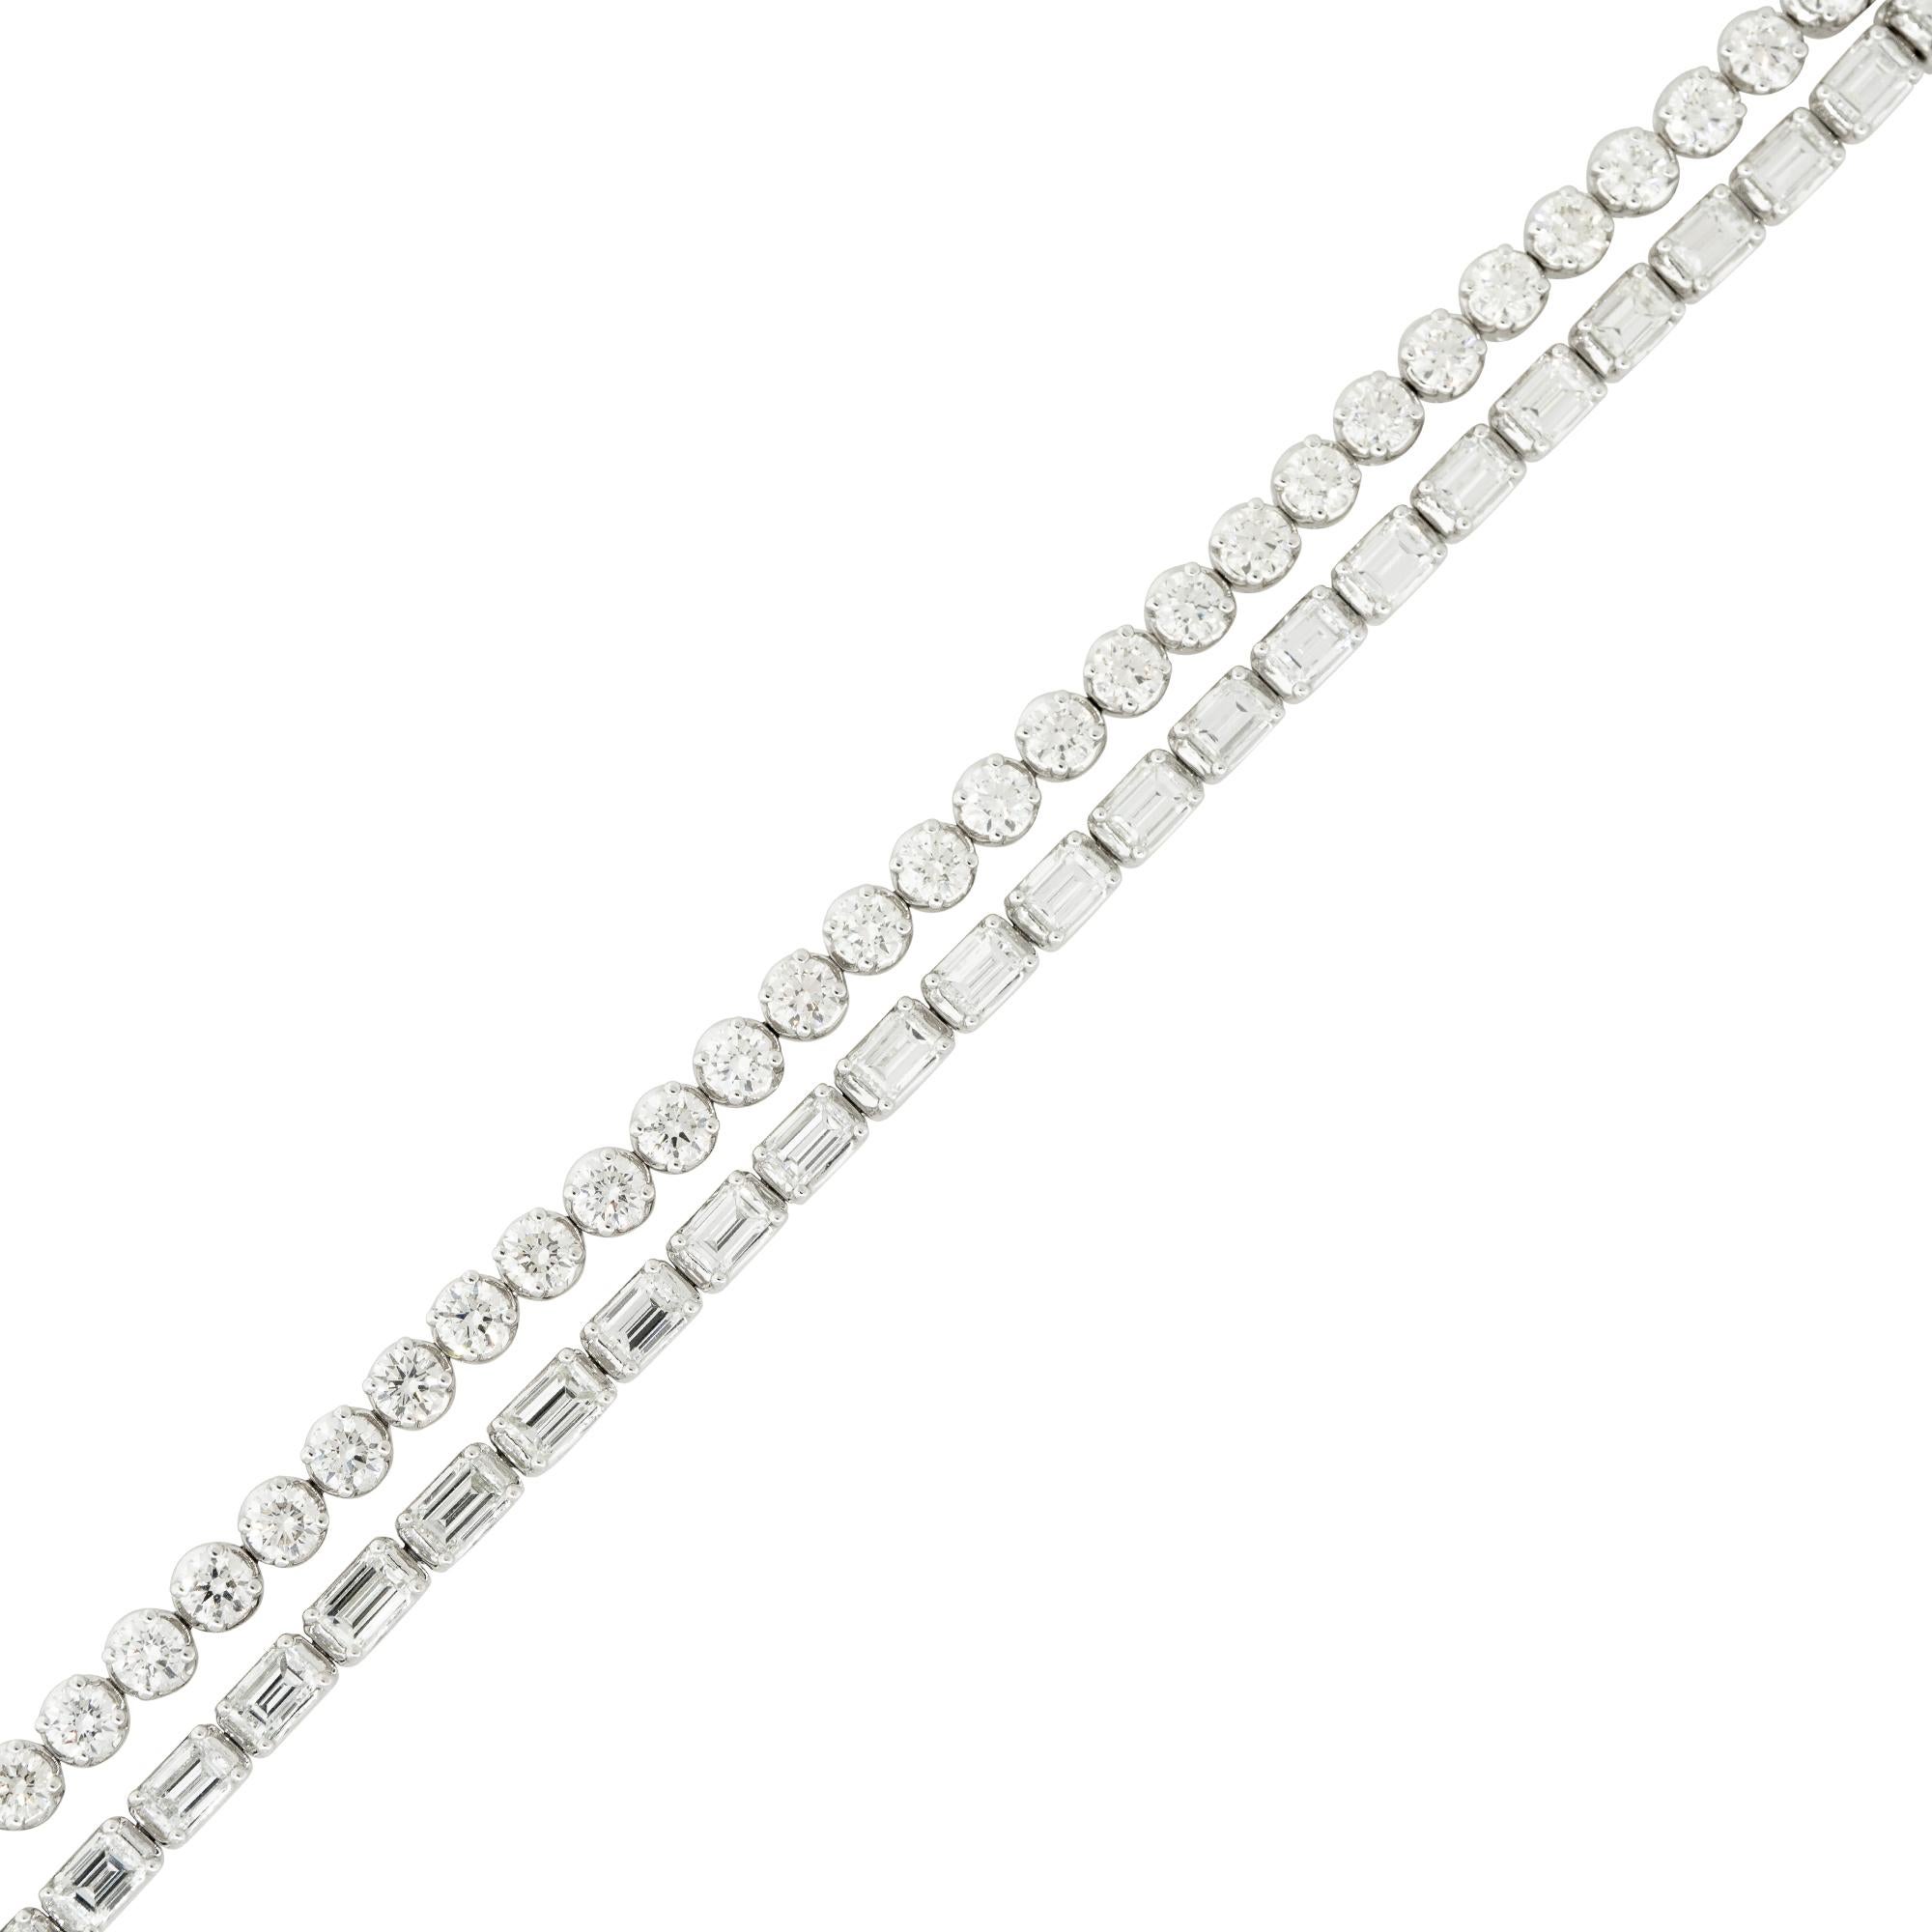 18k White Gold 9.29ctw Double Row Diamond Tennis Bracelet
Material: 18k White Gold
Diamond Details: Approximately 9.29ctw of Emerald Cut and Round Brilliant cut Diamonds. There are 2 rows of diamonds; one row with 38 Emerald cut diamonds and another